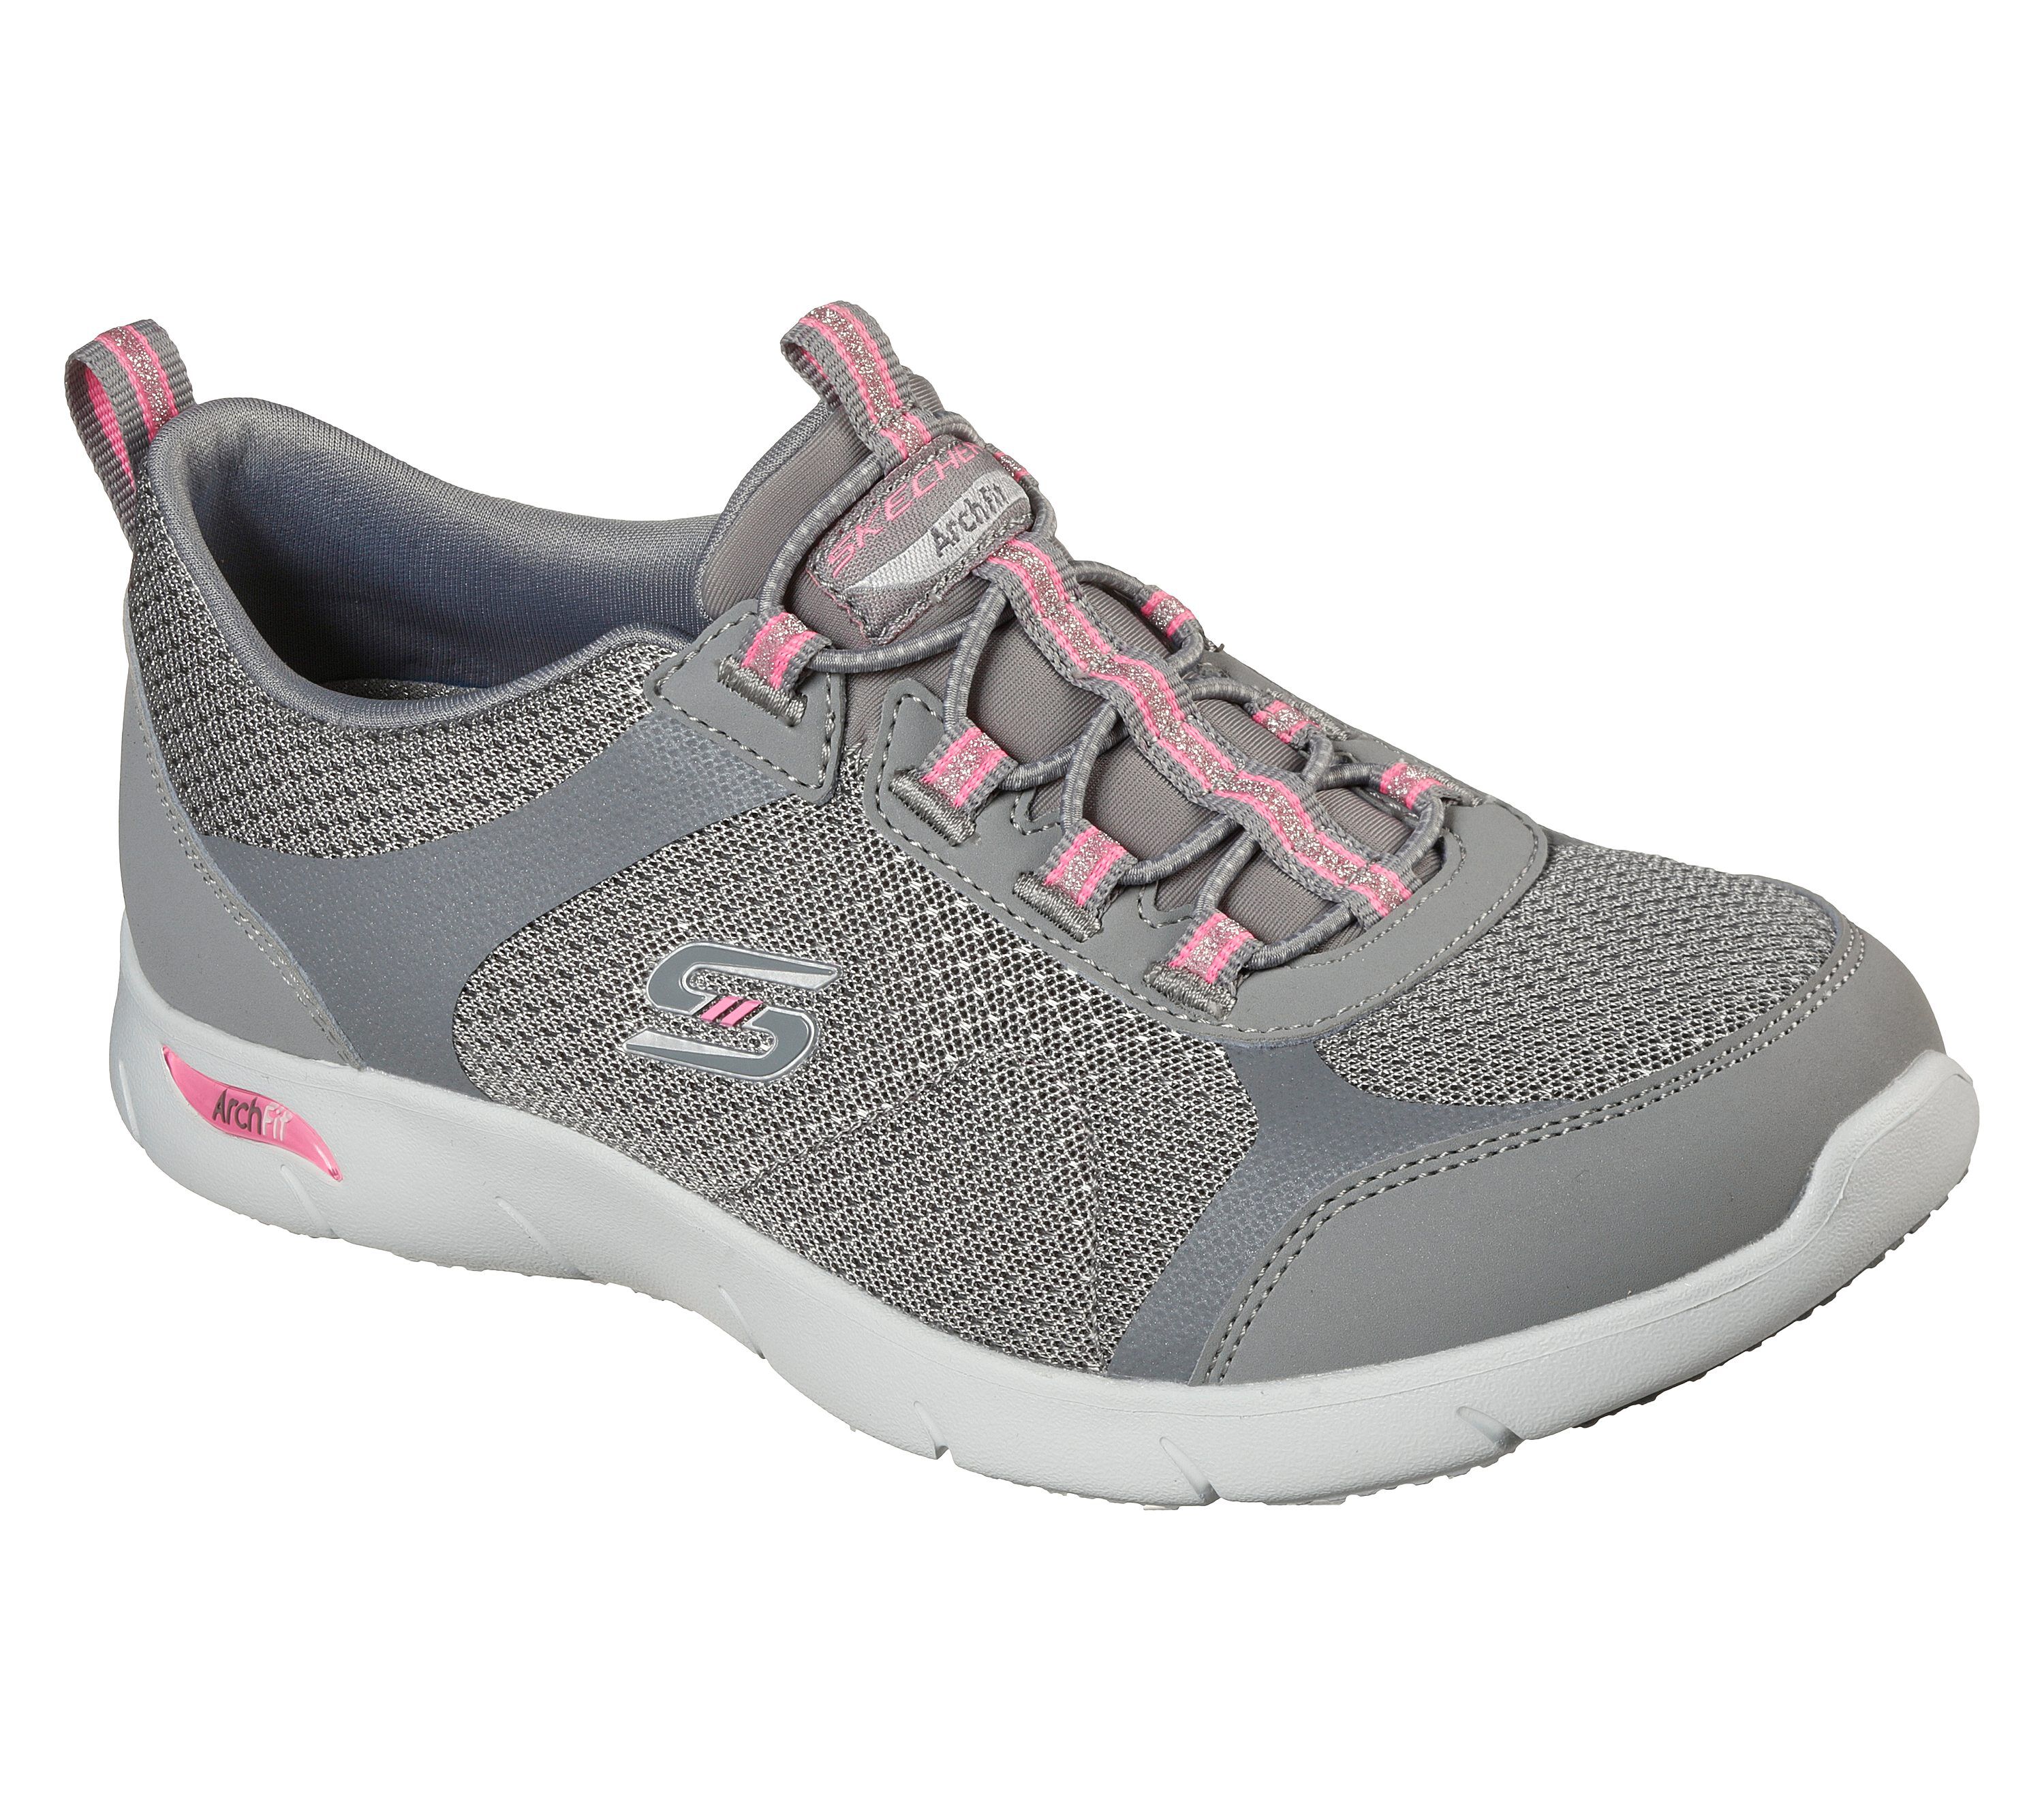 skechers gray shoes